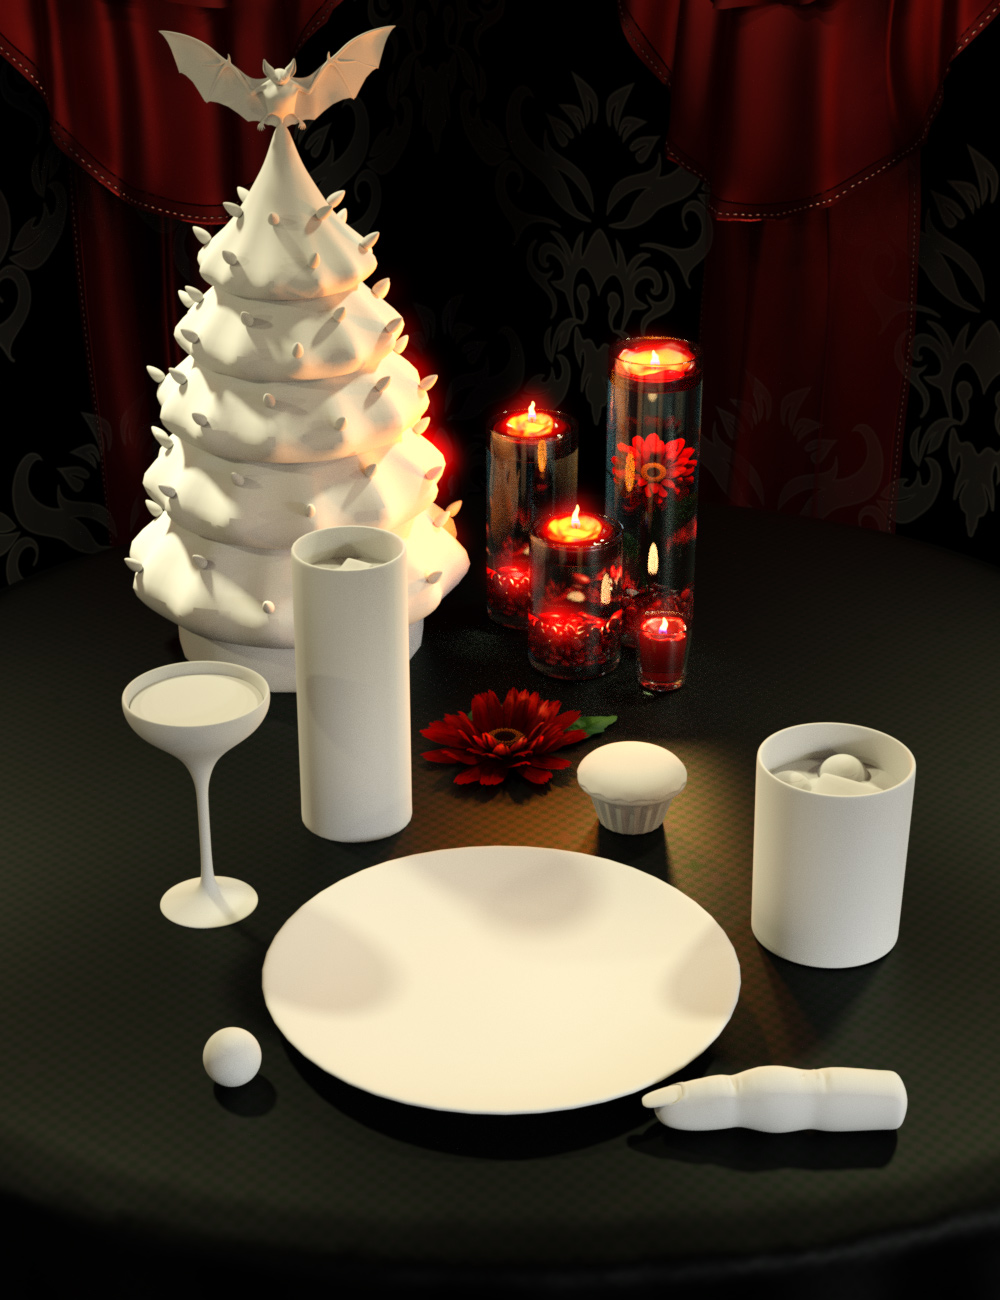 Halloween Fright Table Decor by: ARTCollab, 3D Models by Daz 3D